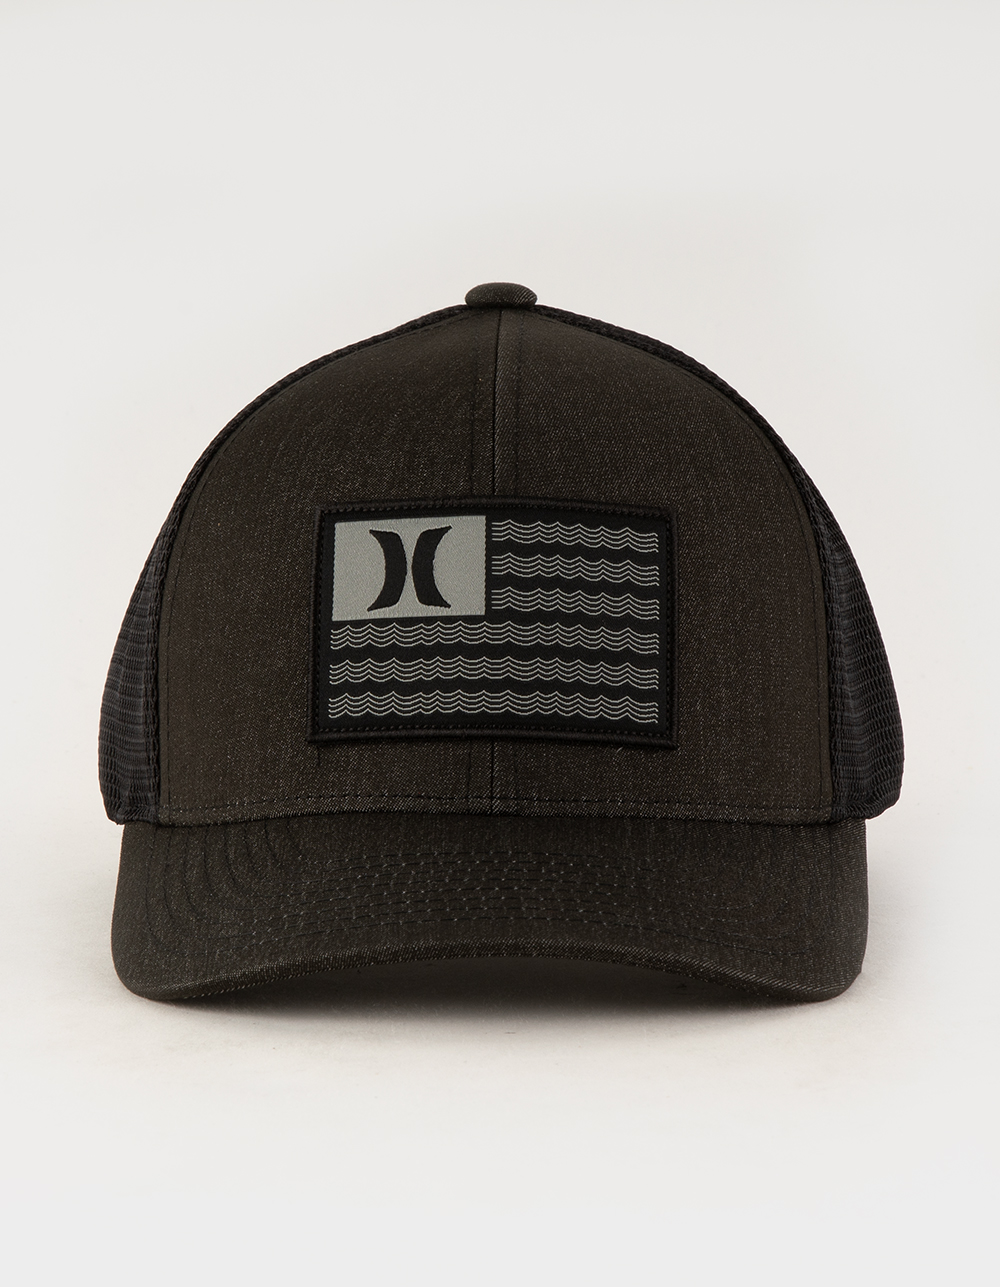 Hurley Men's One and Only Flexfit Hat, Black, Small/Medium at  Men's  Clothing store: Baseball Caps